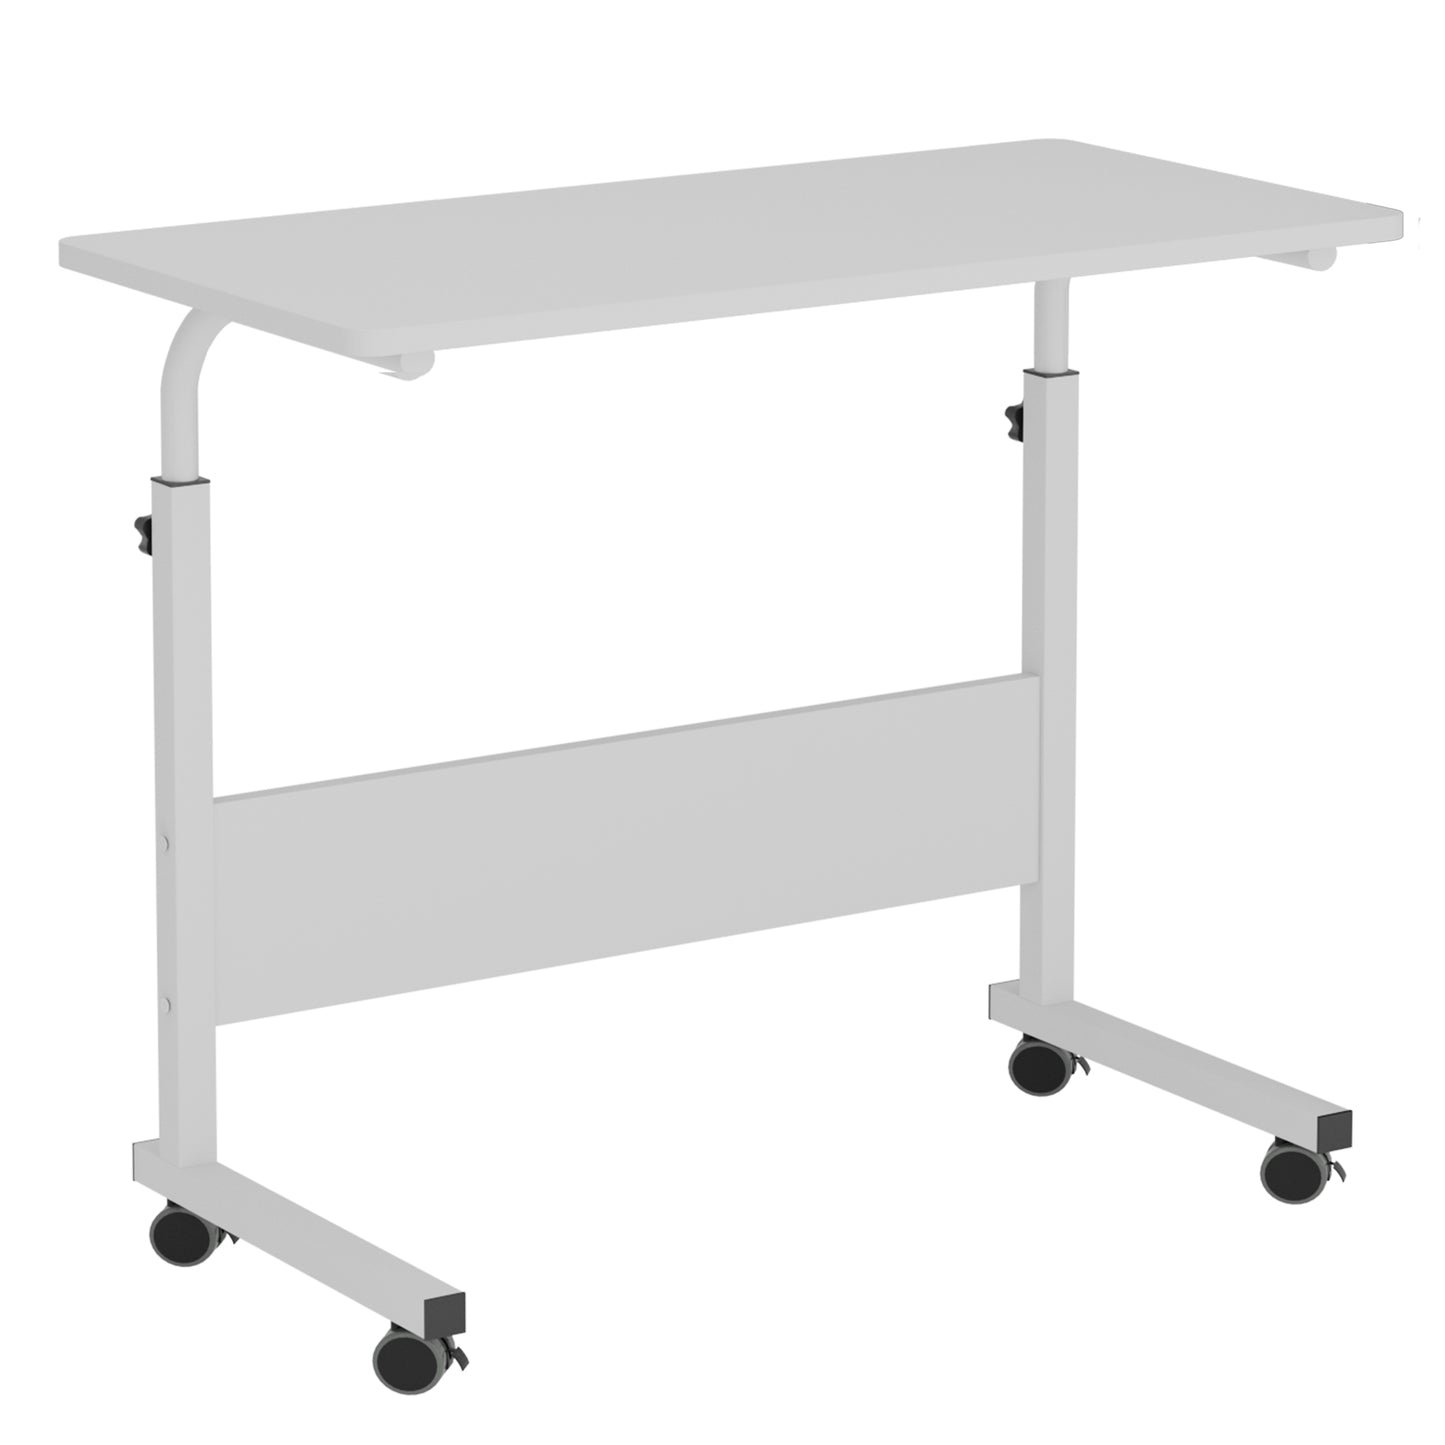 SogesPower C-Shaped Standing Computer Desk with Wheels, Movable Side Desk, Height Adjustable